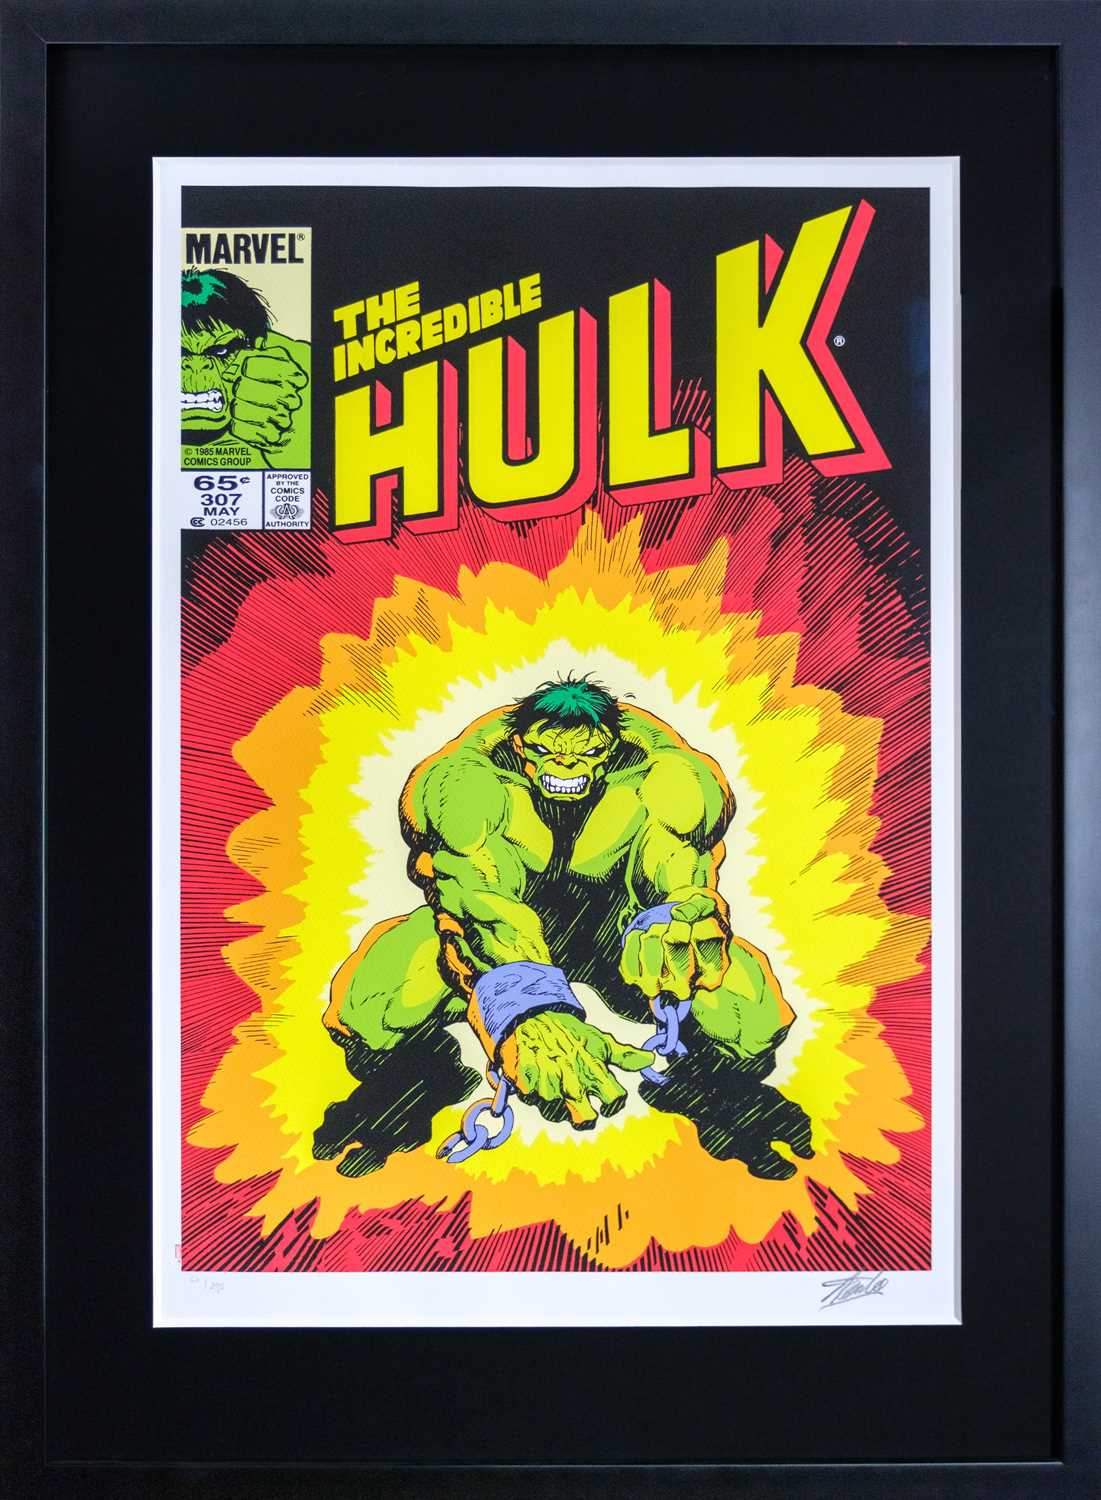 (Signed) Stan LEE (1922-2018) The Incredible Hulk #307 (2013) - Image 2 of 5